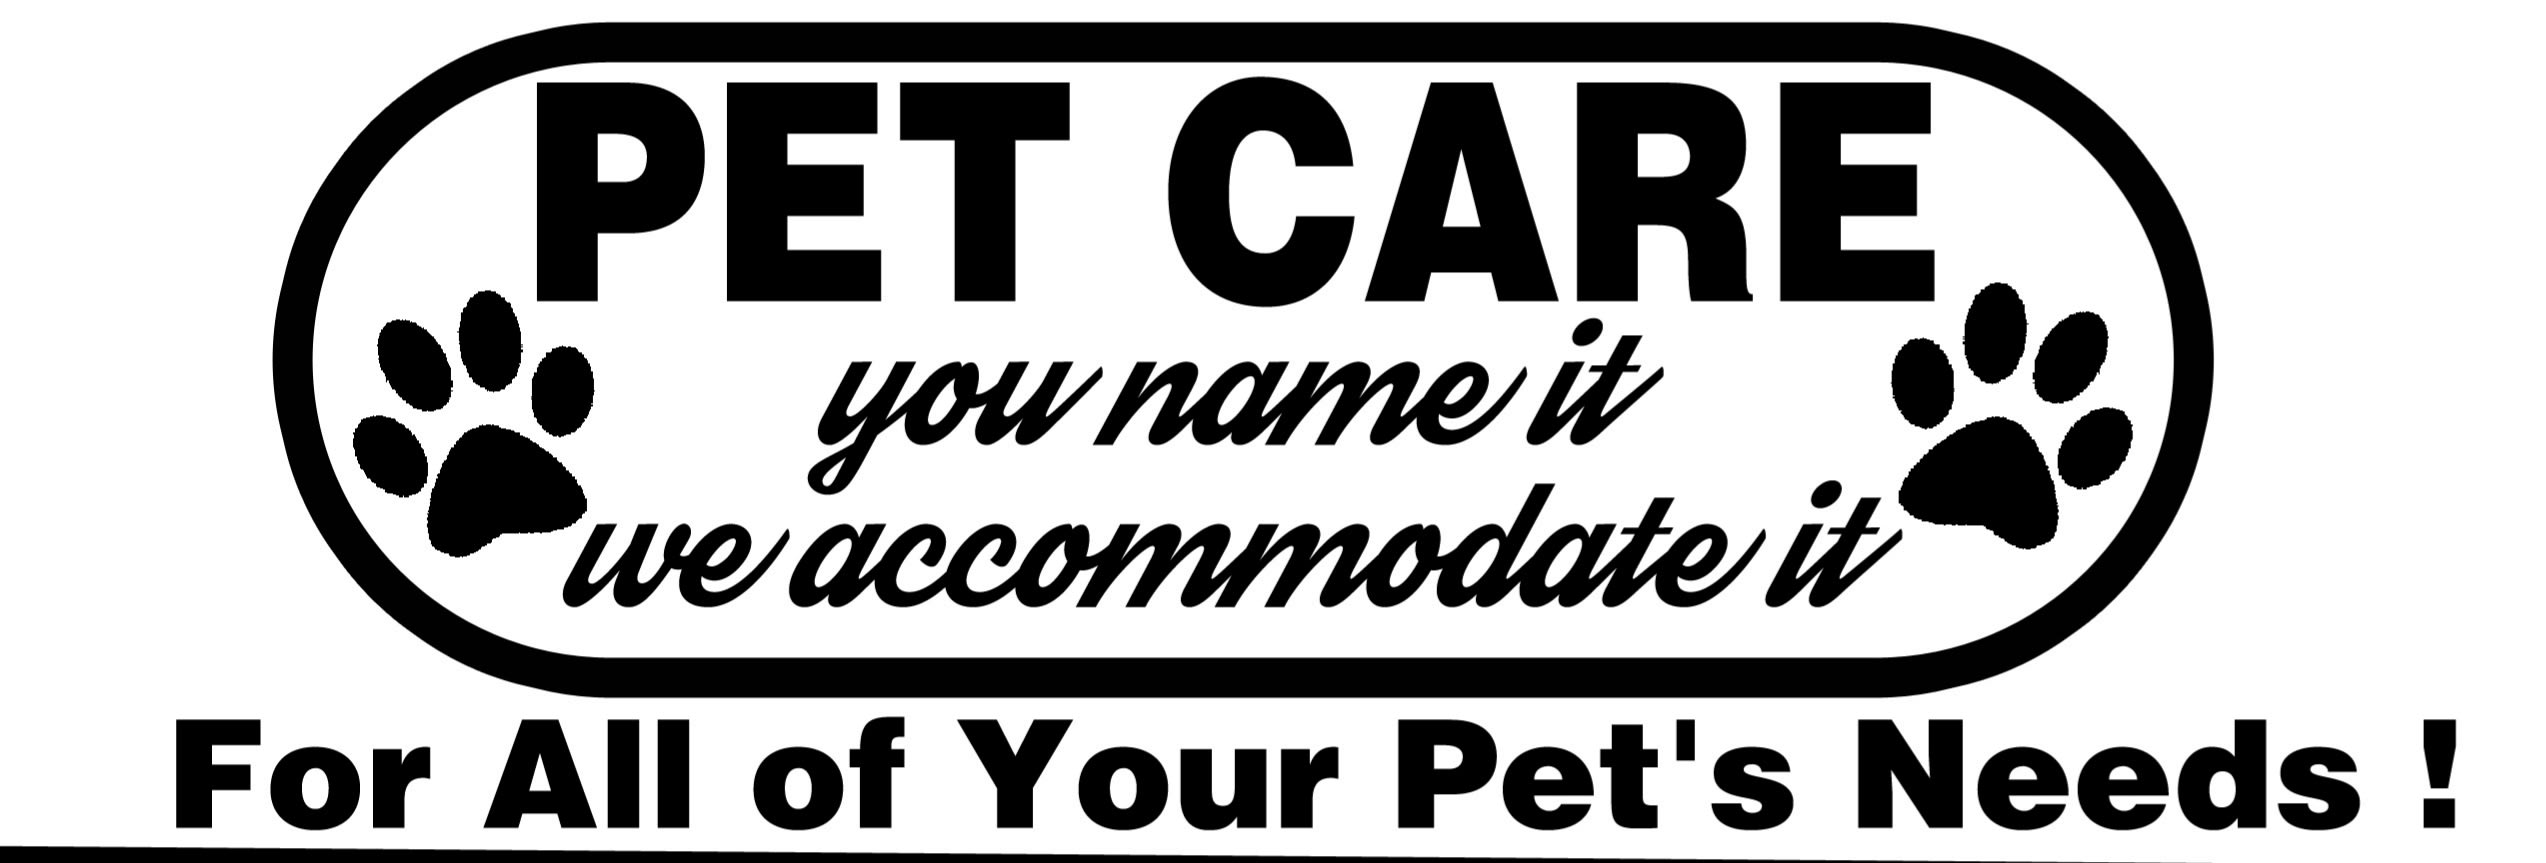 Pet Care- you name it we accommodate it